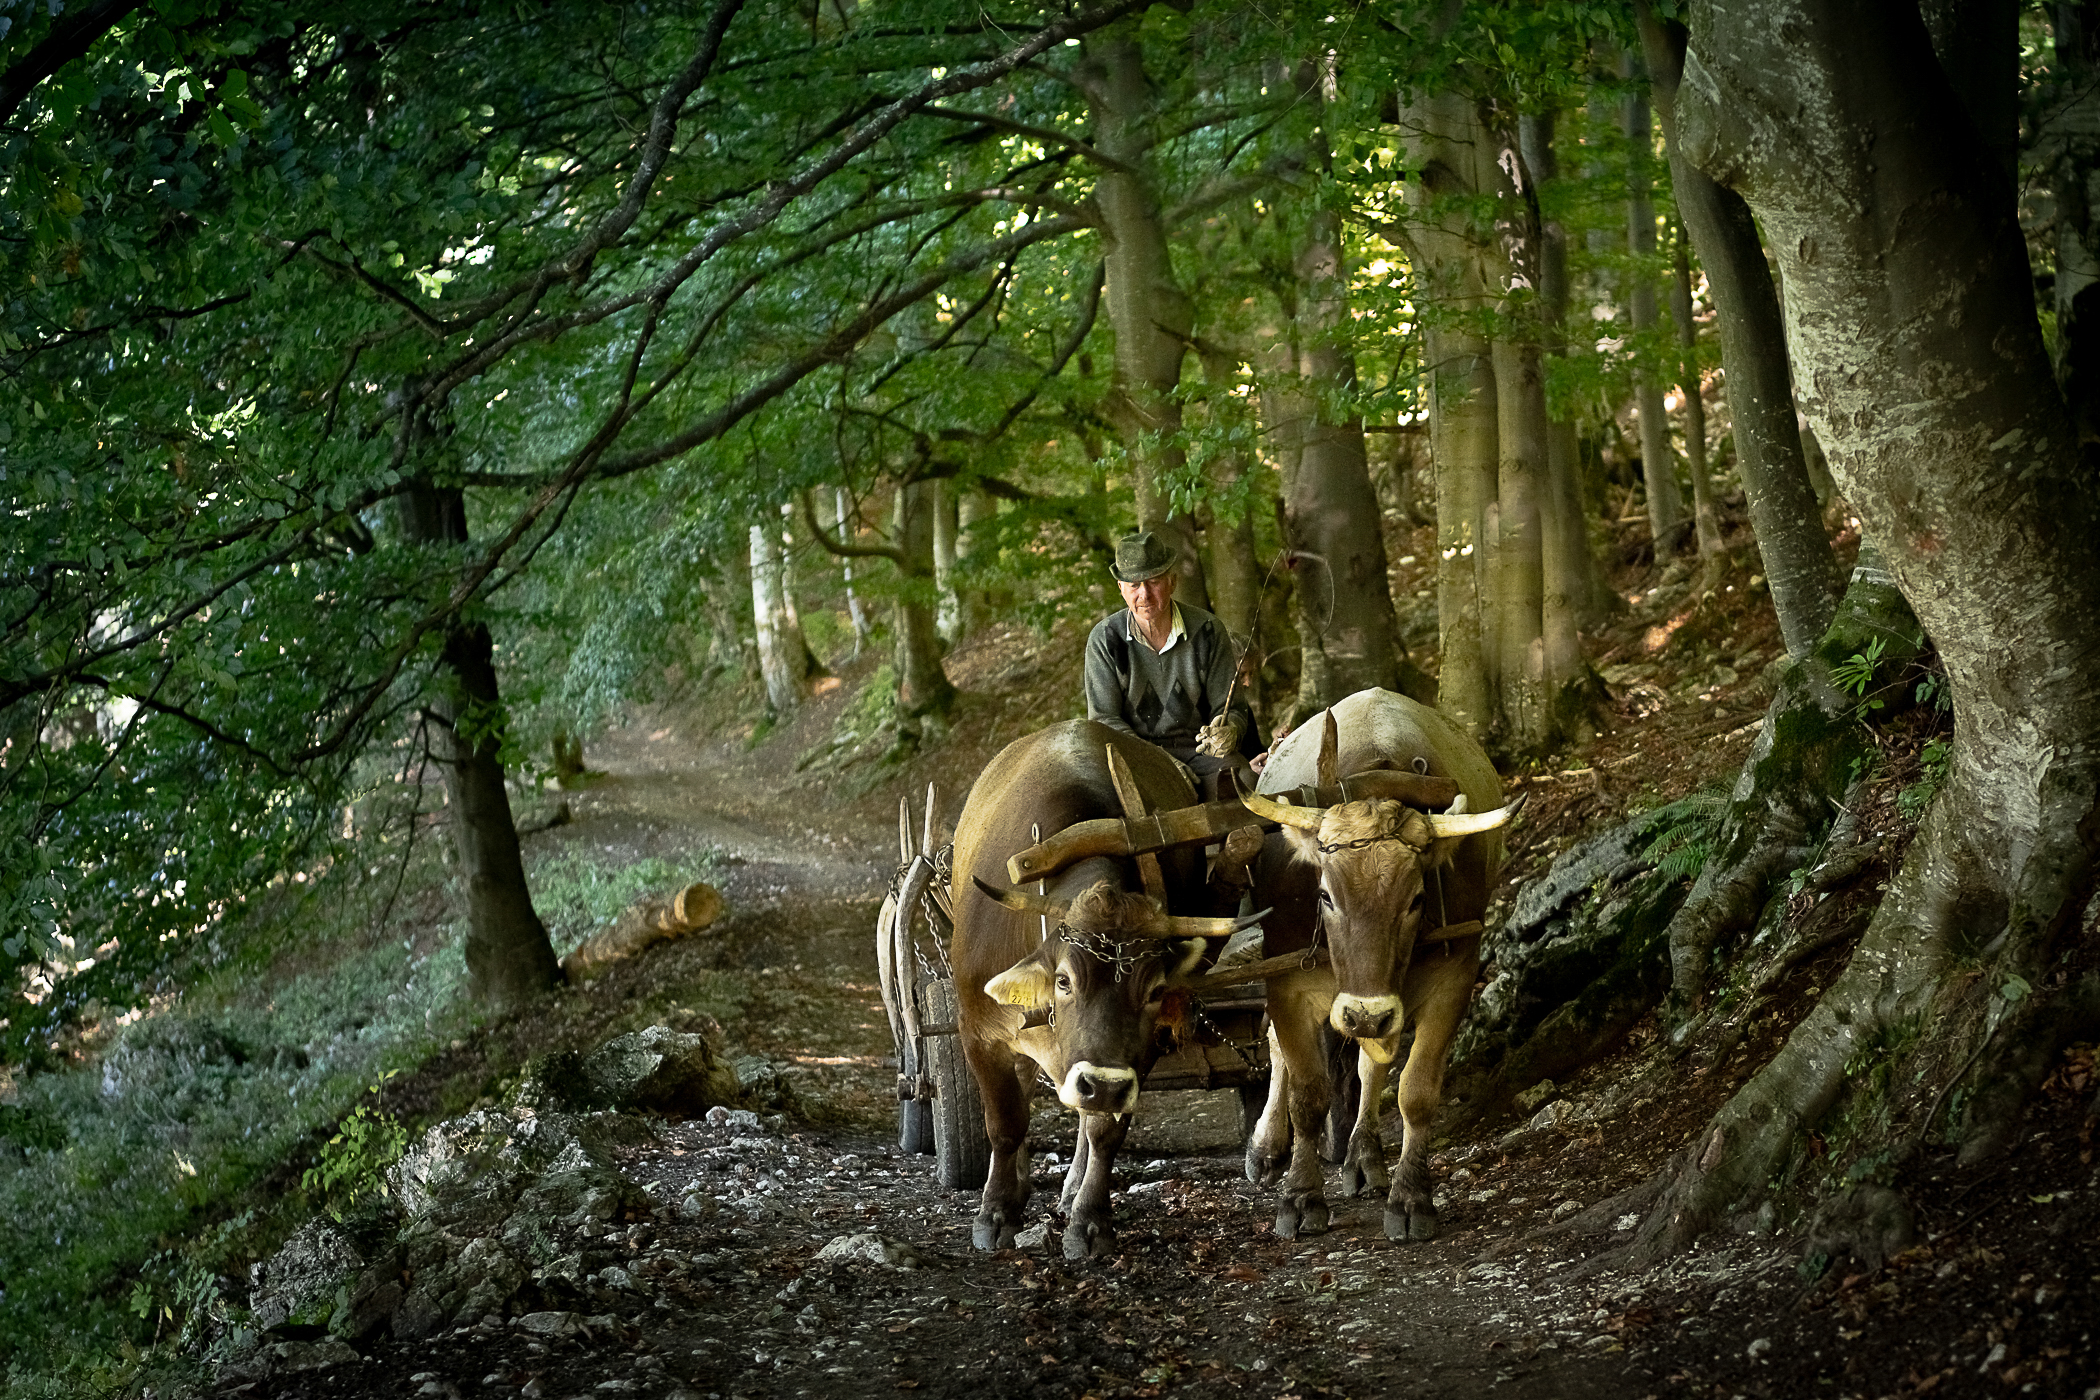 Man on cart pulled by oxen in a forest in the